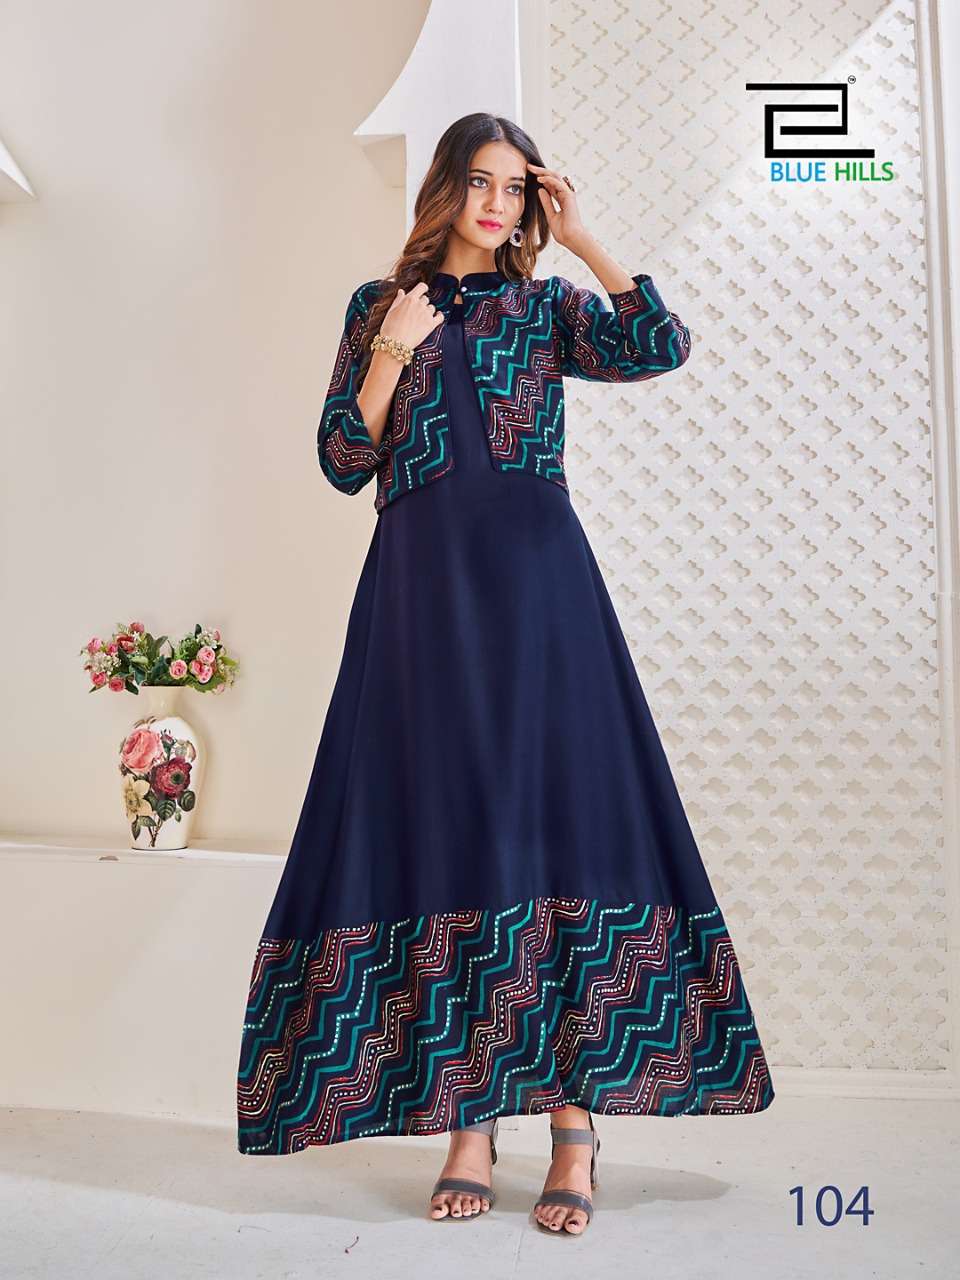 HELLO JACKET BY BLUE HILLS 101 TO 104 SERIES BEAUTIFUL STYLISH FANCY COLORFUL CASUAL WEAR & ETHNIC WEAR RAYON GOWNS WITH JACKET AT WHOLESALE PRICE